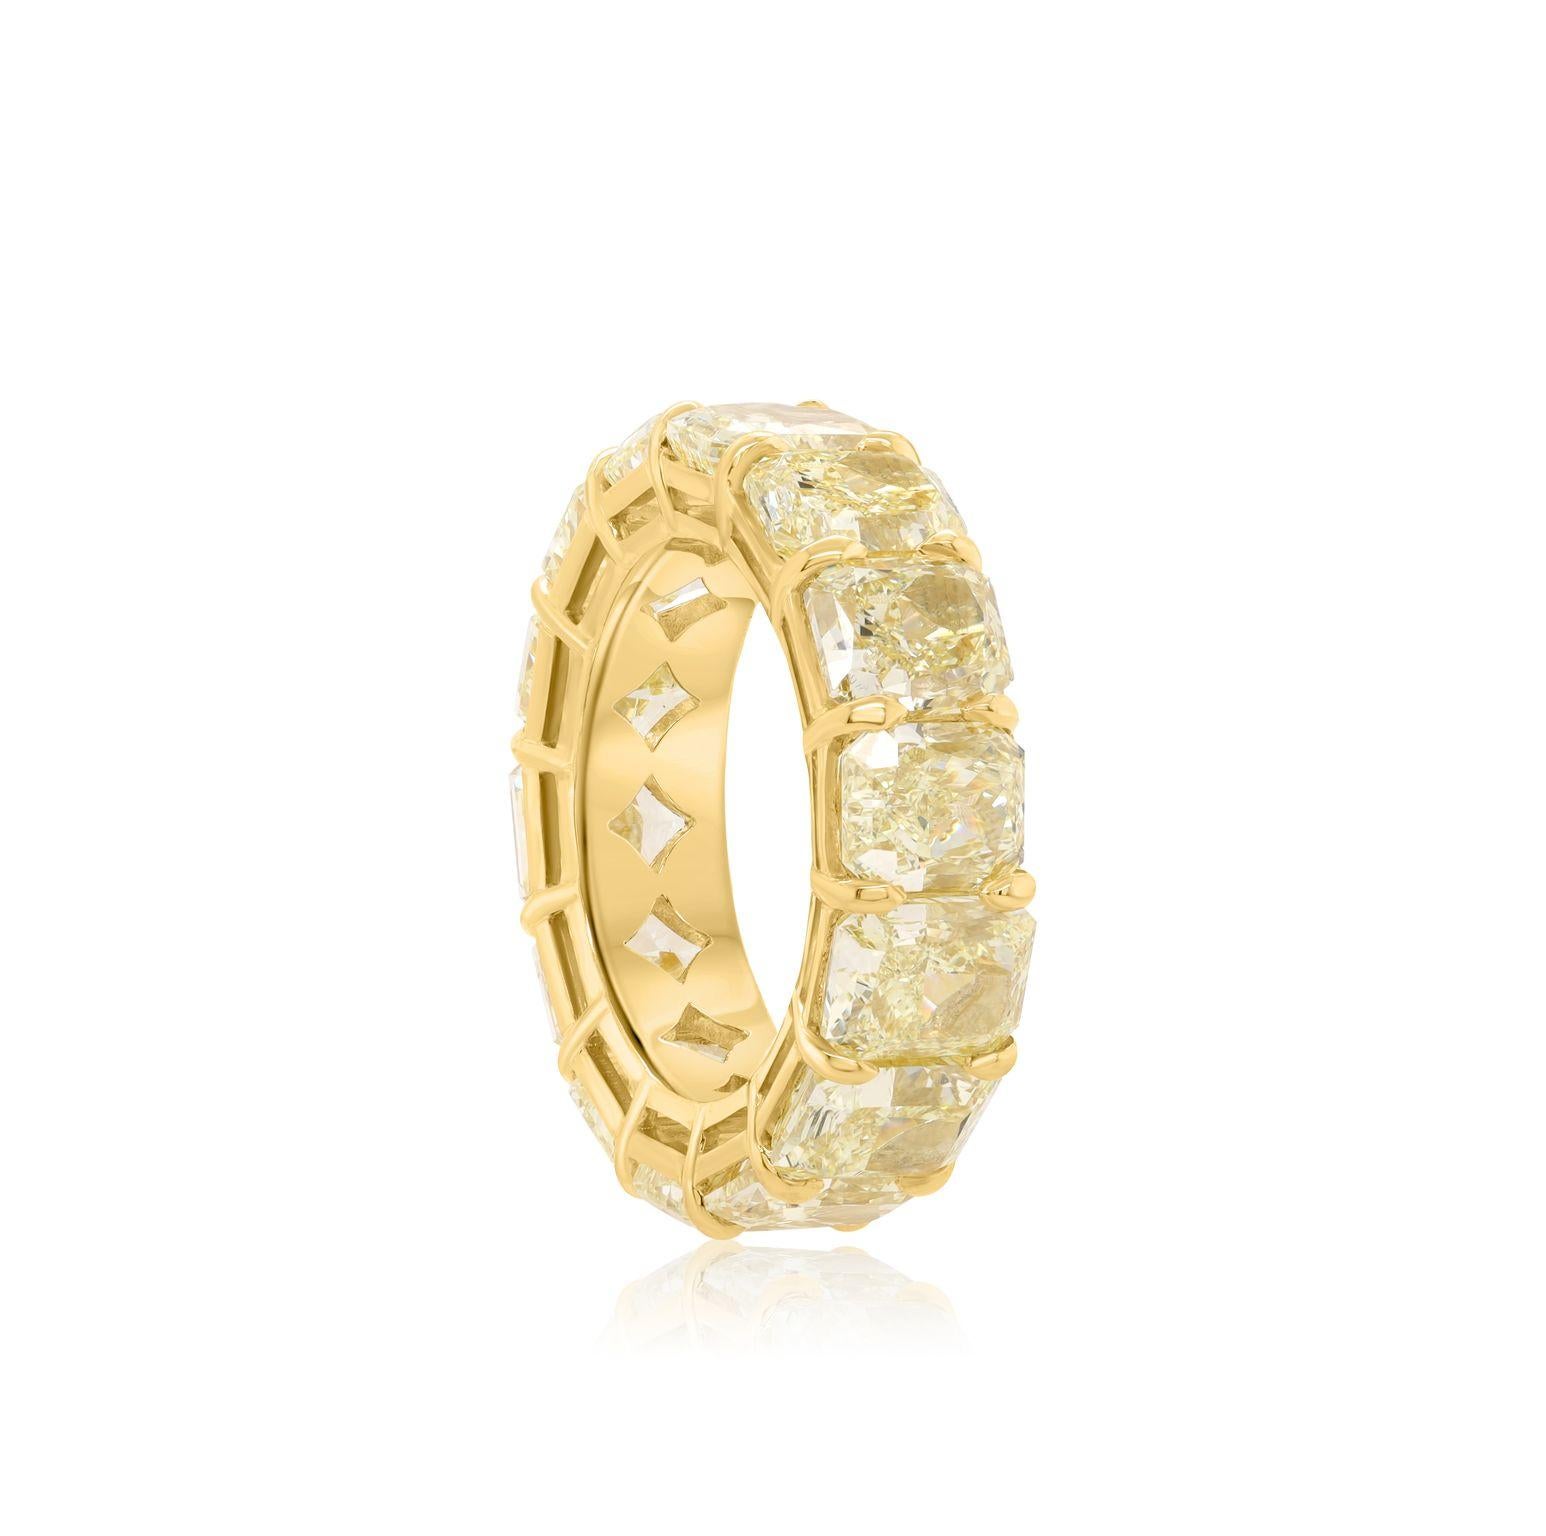 18 kt yellow gold wedding band featuring 15.38 cts tw of cushion cut GIA certified diamonds going all around (FLY VVS-VS), 14 stones
Diana M is one-stop shop for all your jewelry shopping, carrying line of diamond rings, earrings, bracelets,